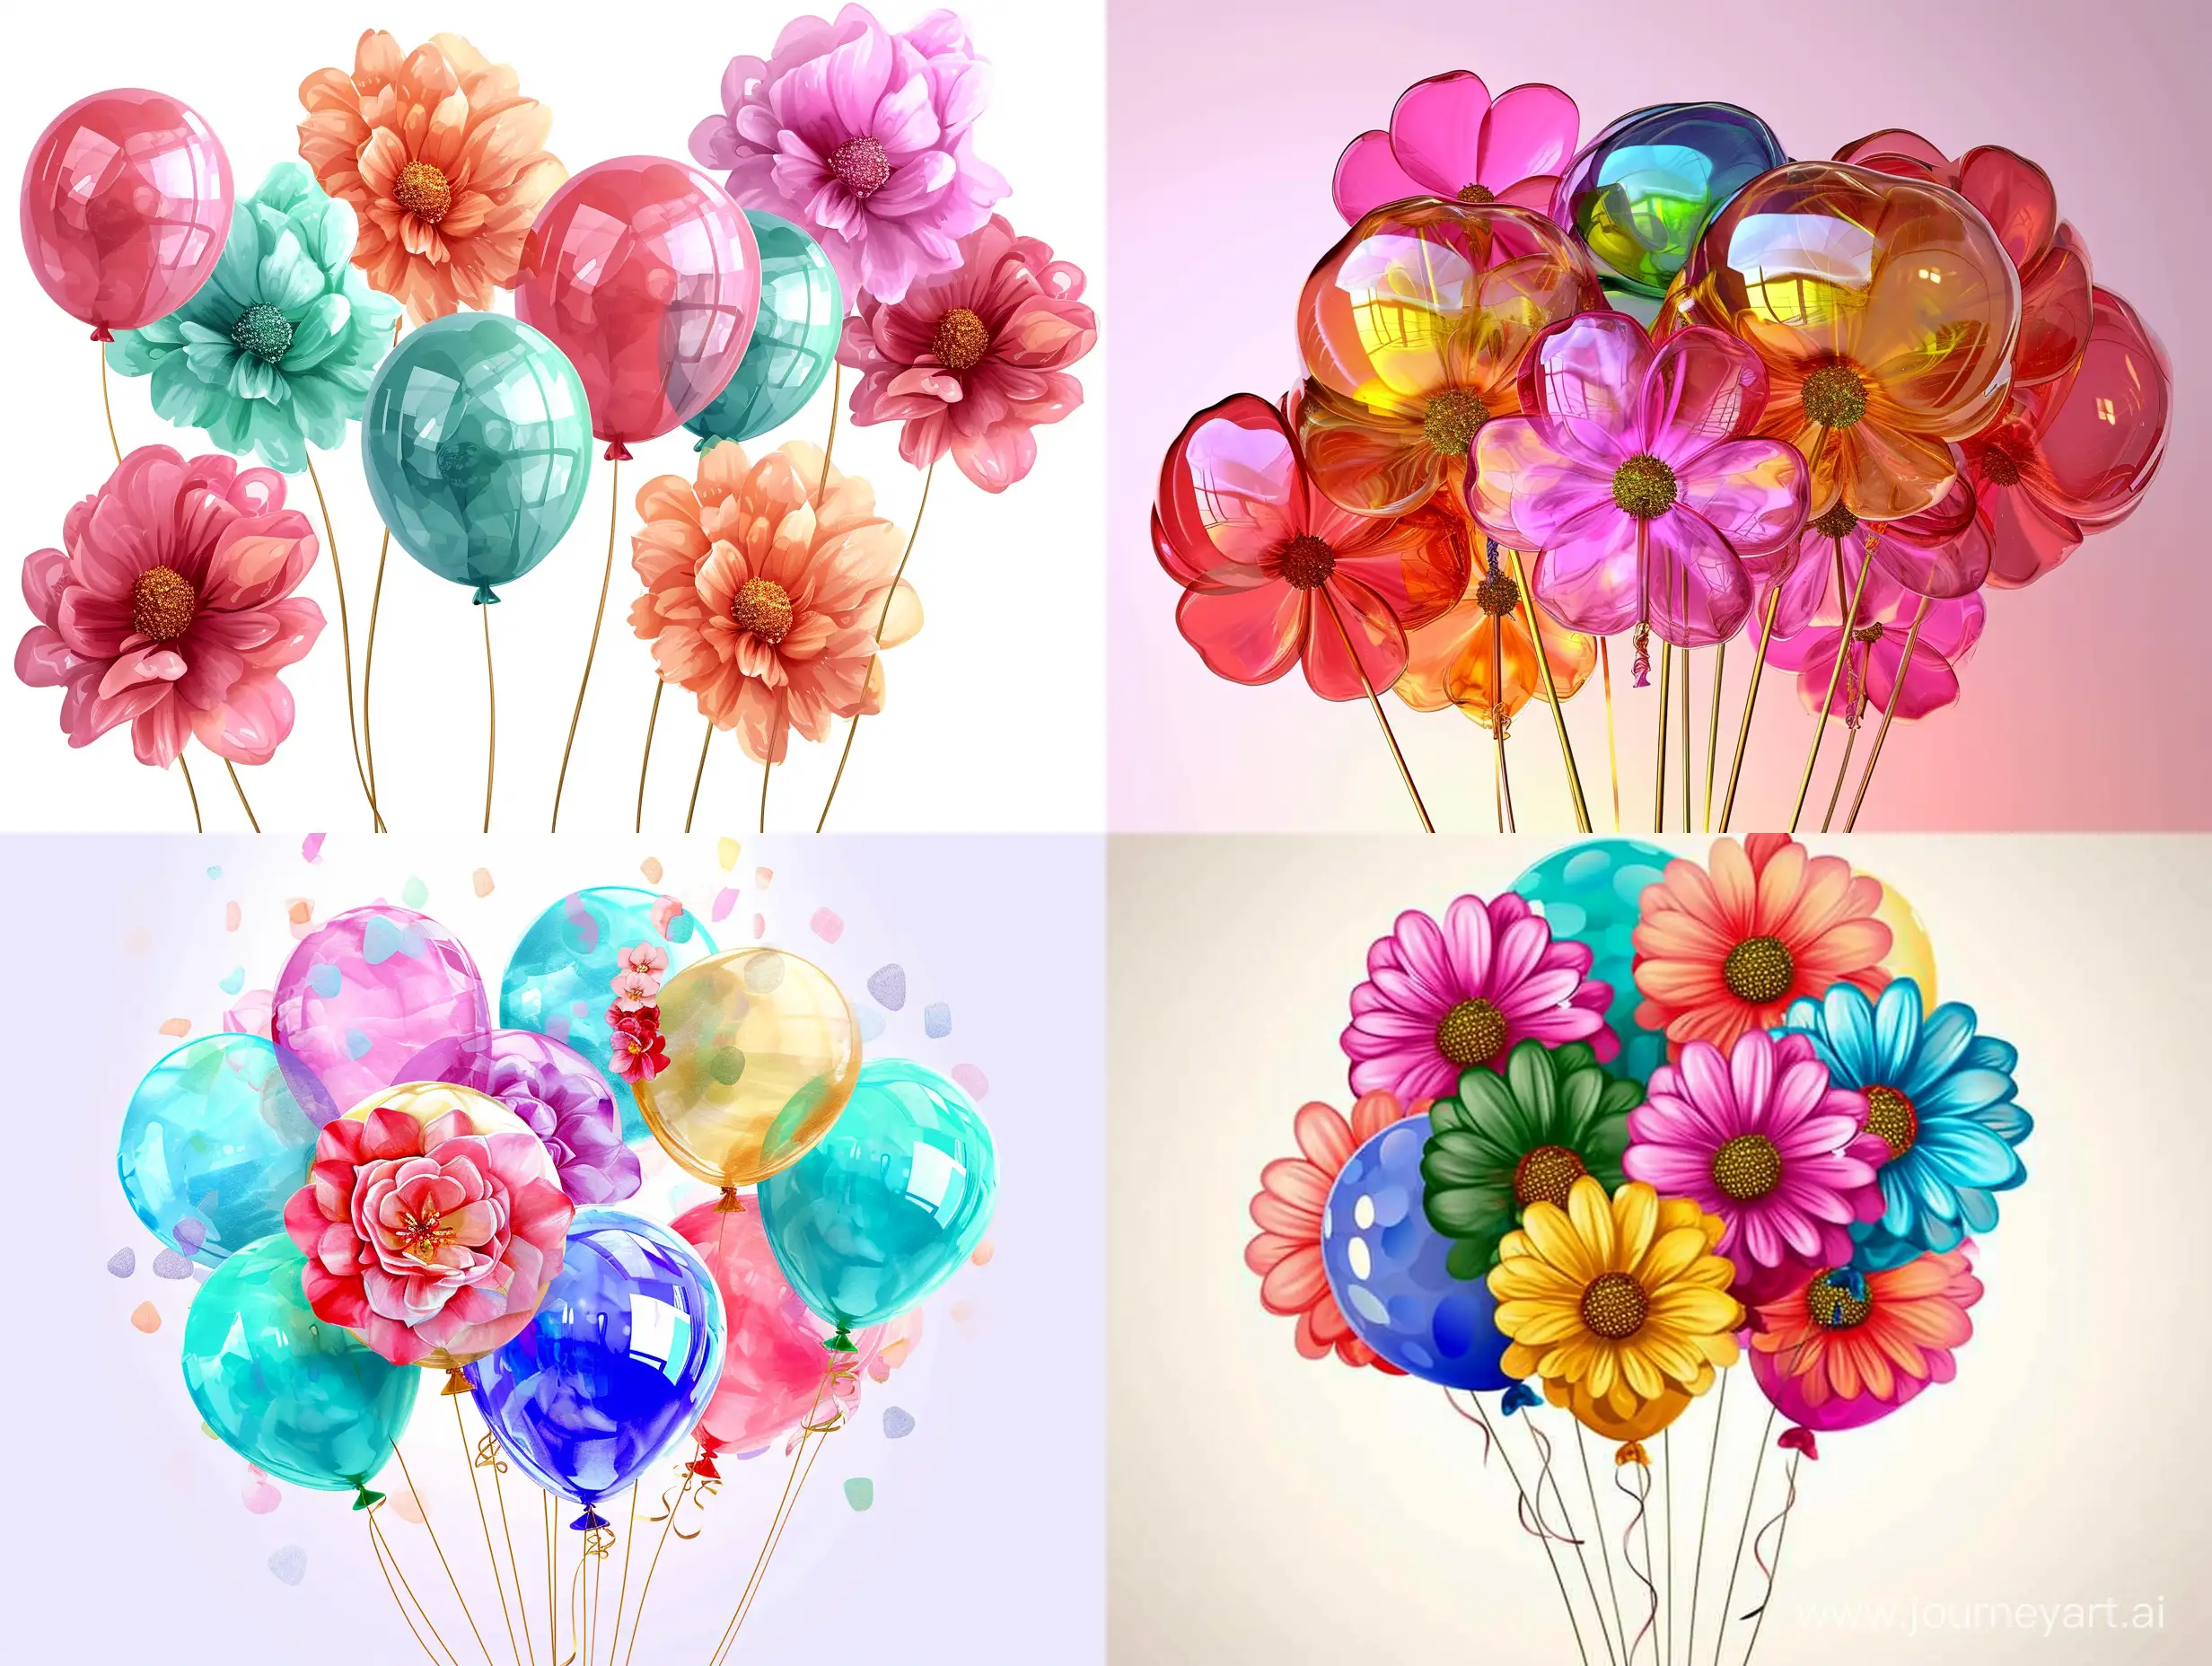 Celebration-with-Vibrant-Flowers-Balloons-and-Festive-Decorations-in-HyperRealistic-Style